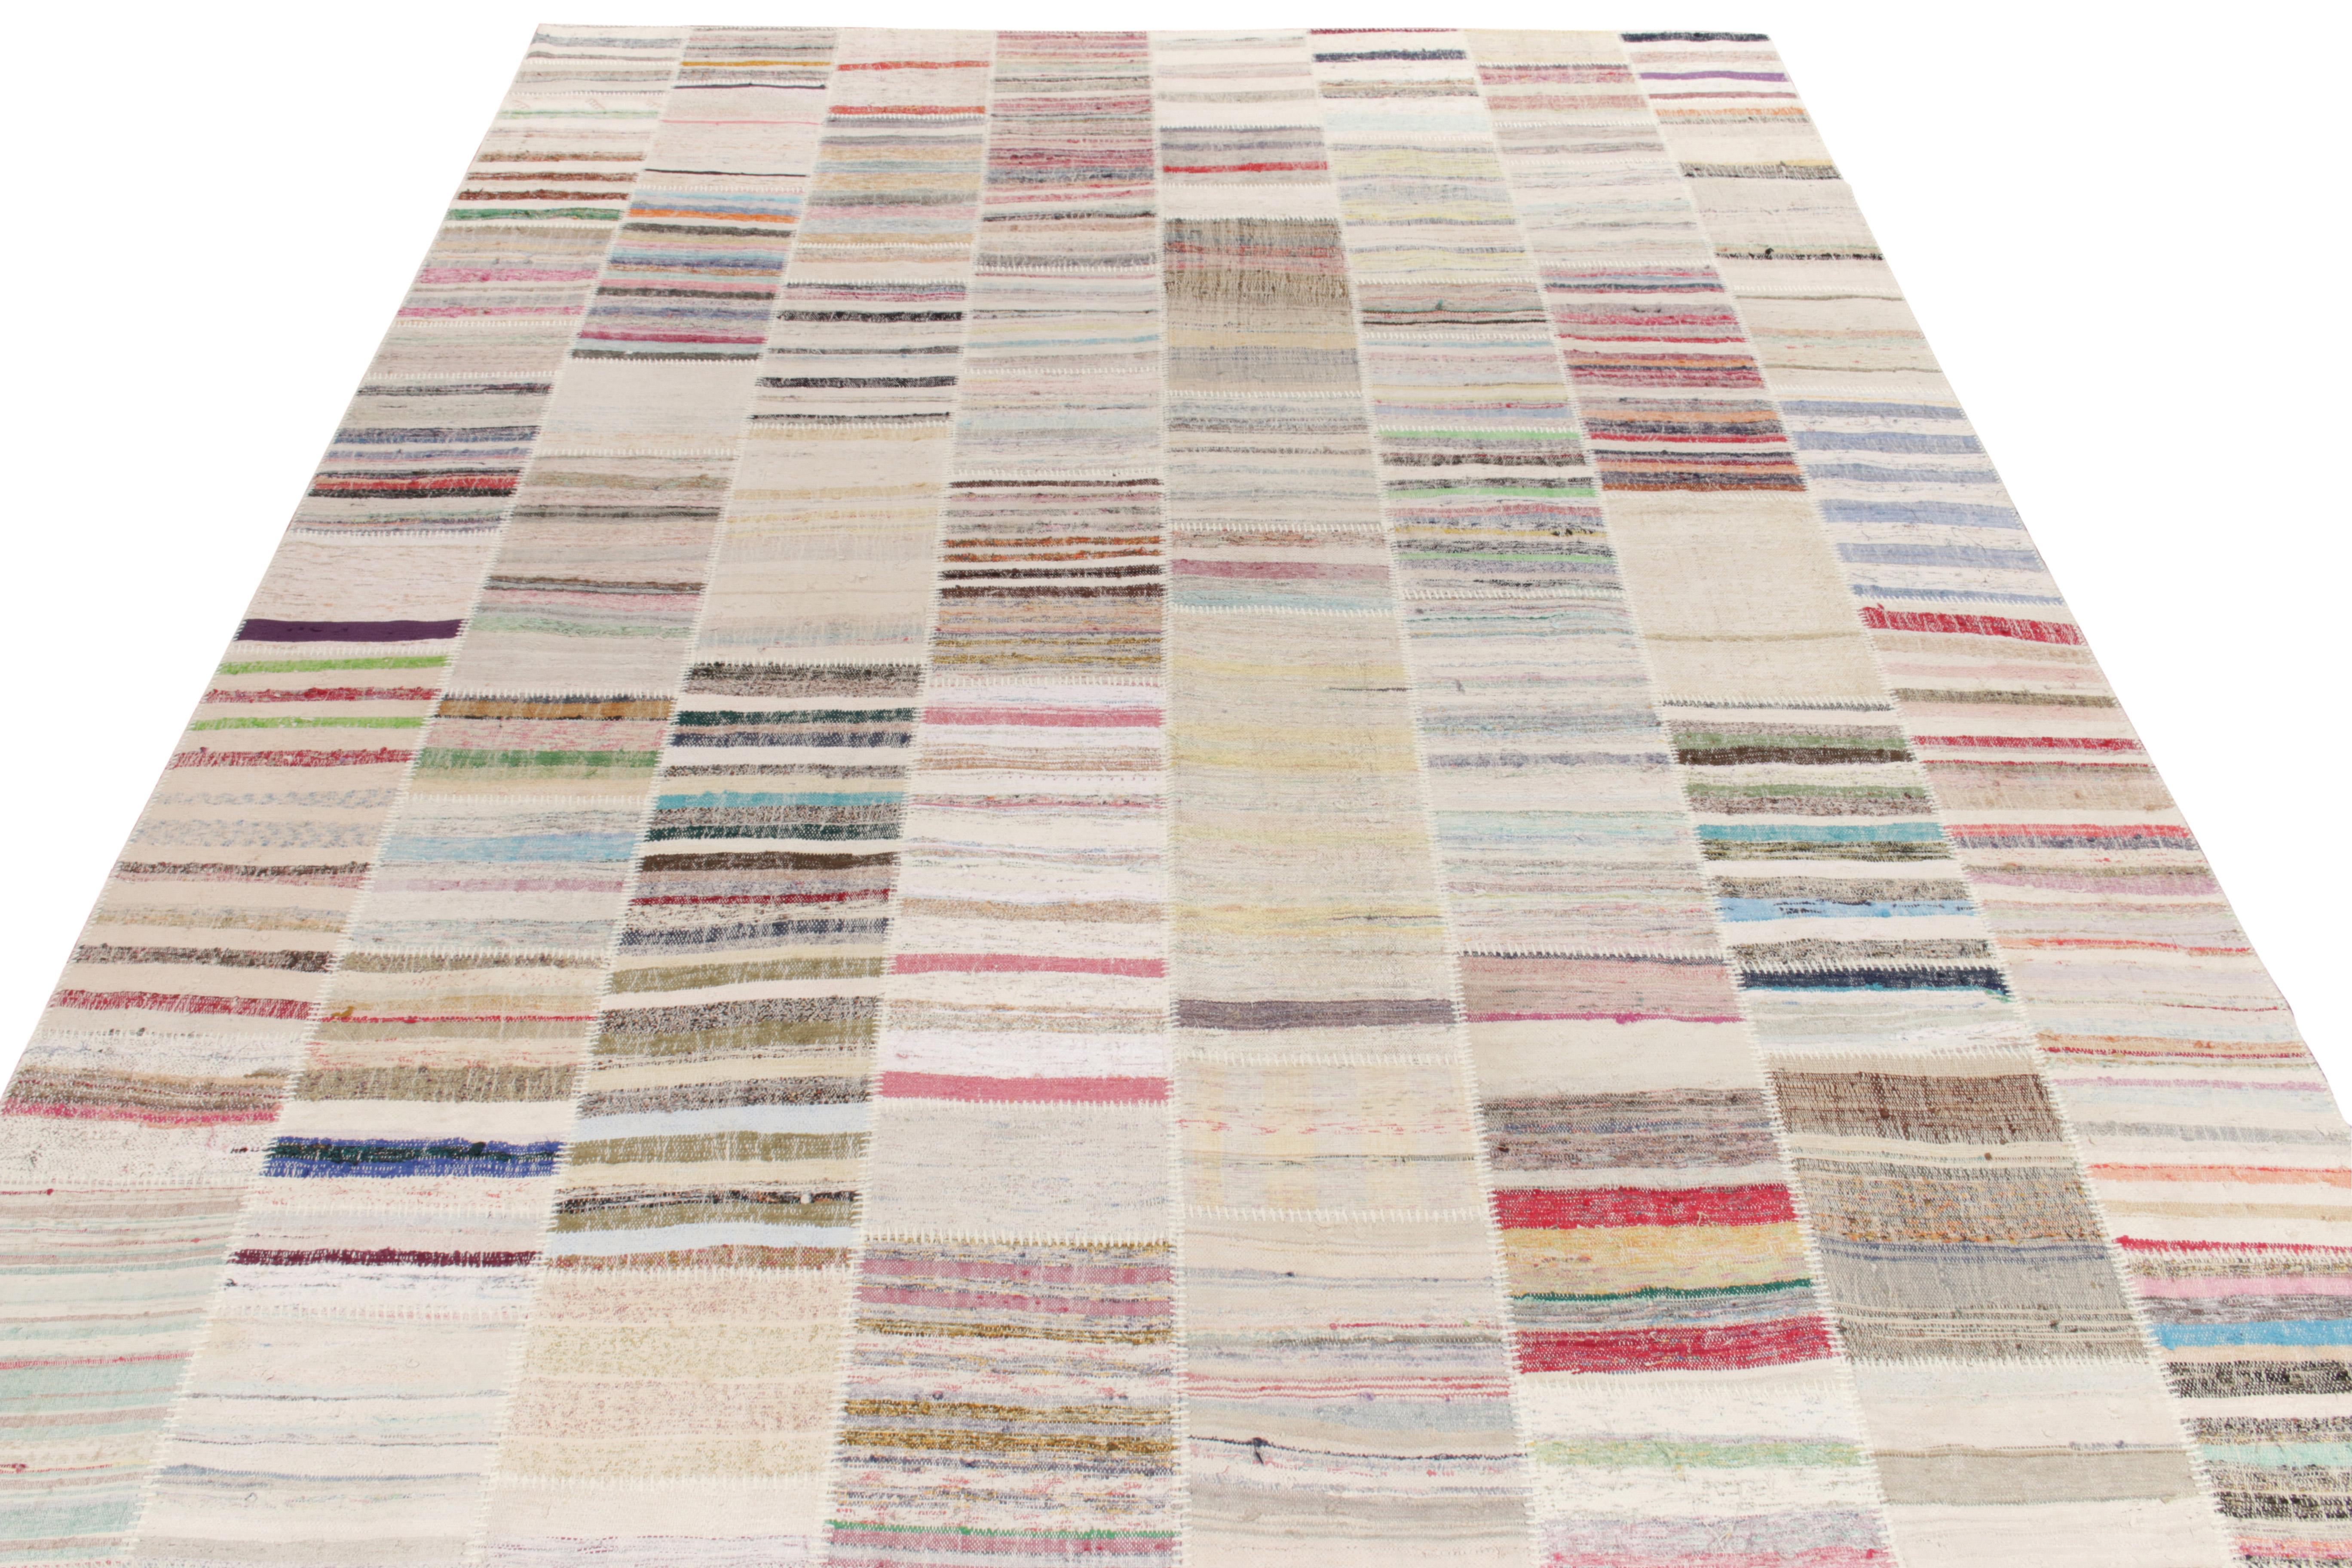 Rug & Kilim boasts its artistic vision of patchwork kilim that reimagines vintage yarns into unique pieces of art. This 10x14 collectible features a striated pattern that lends a smooth sense of movement in variegated shades across the scale.